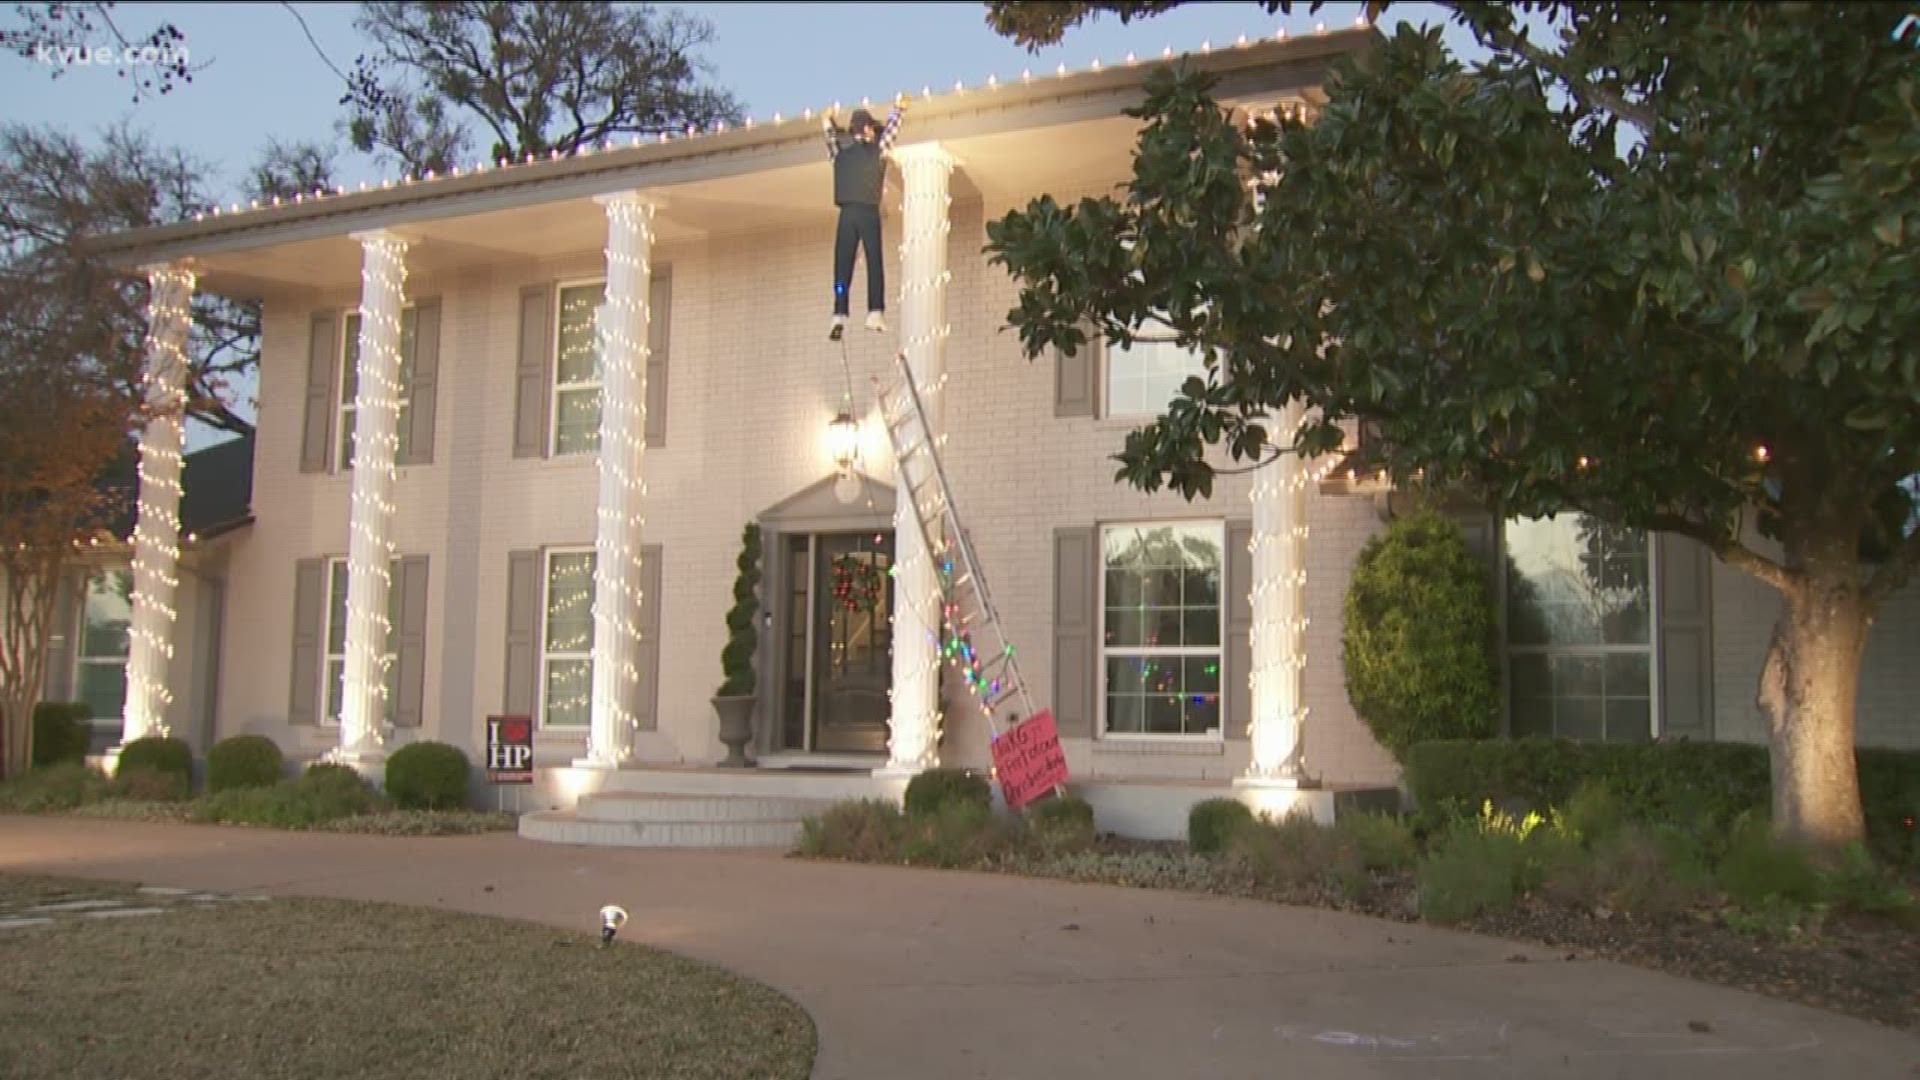 There are many creative light displays this Christmas season, but nothing beats this Griswold Christmas decoration at one Austin home.